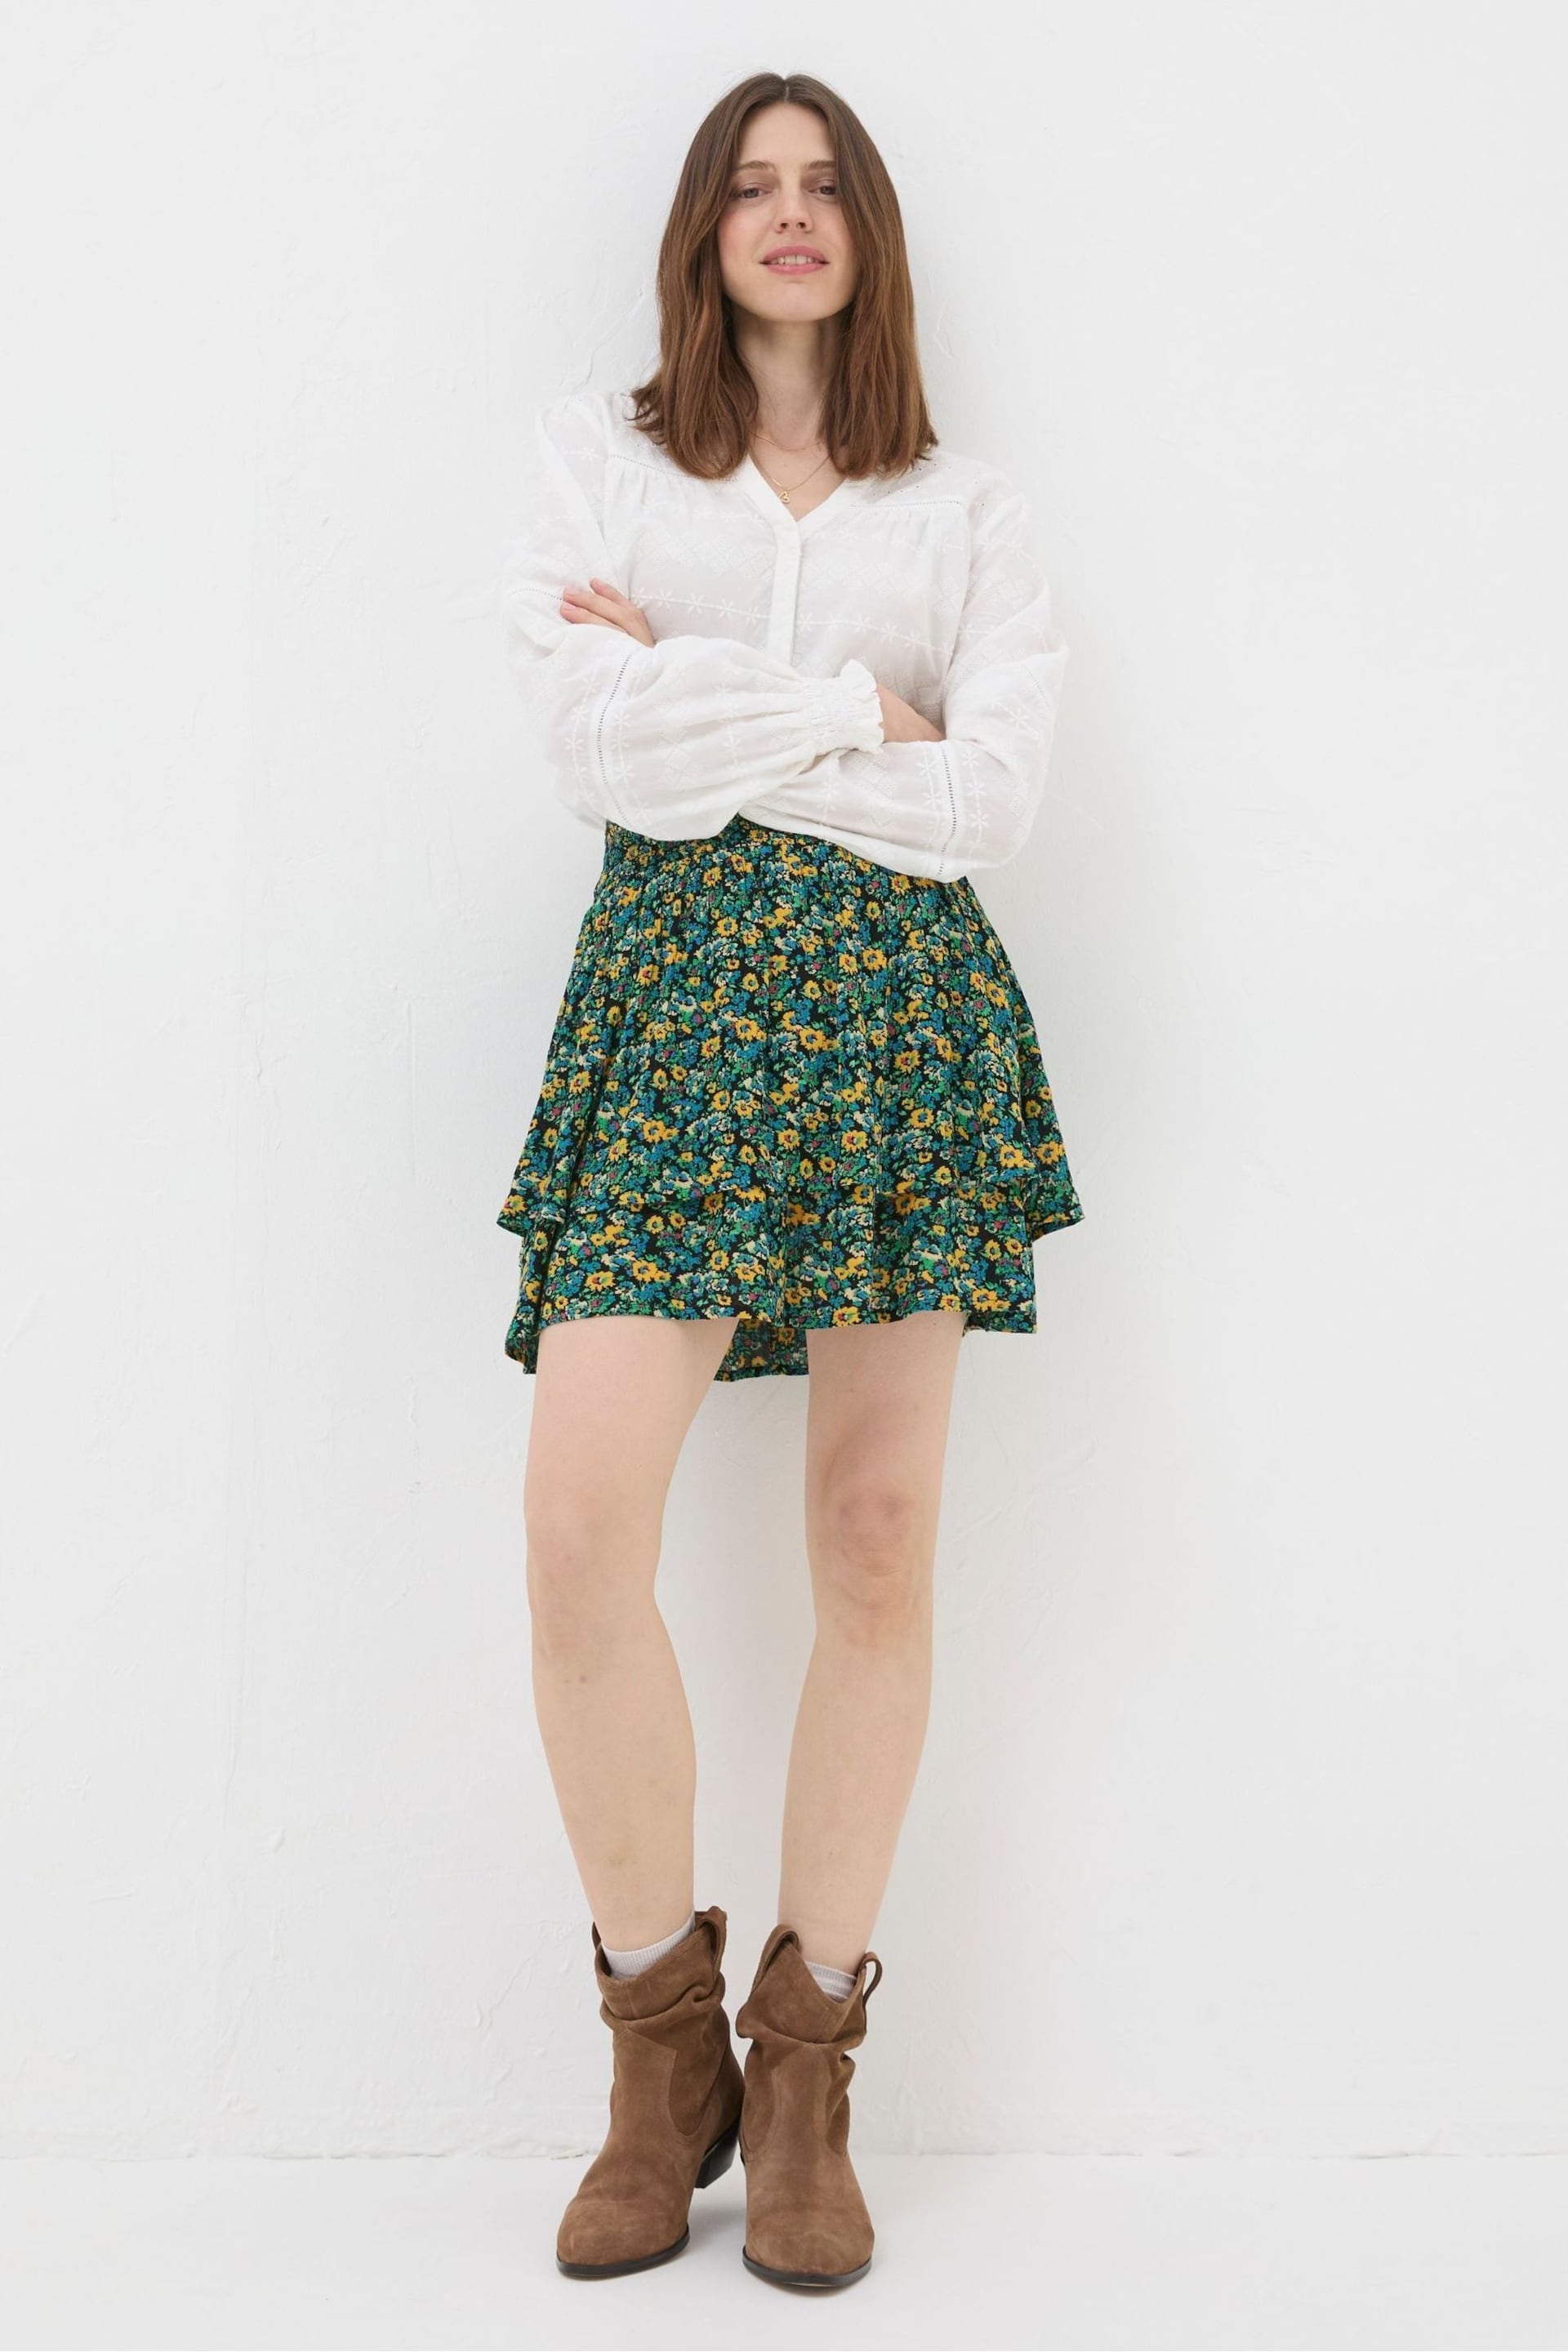 FatFace Green Ali Spring Floral Skirt - Image 4 of 5